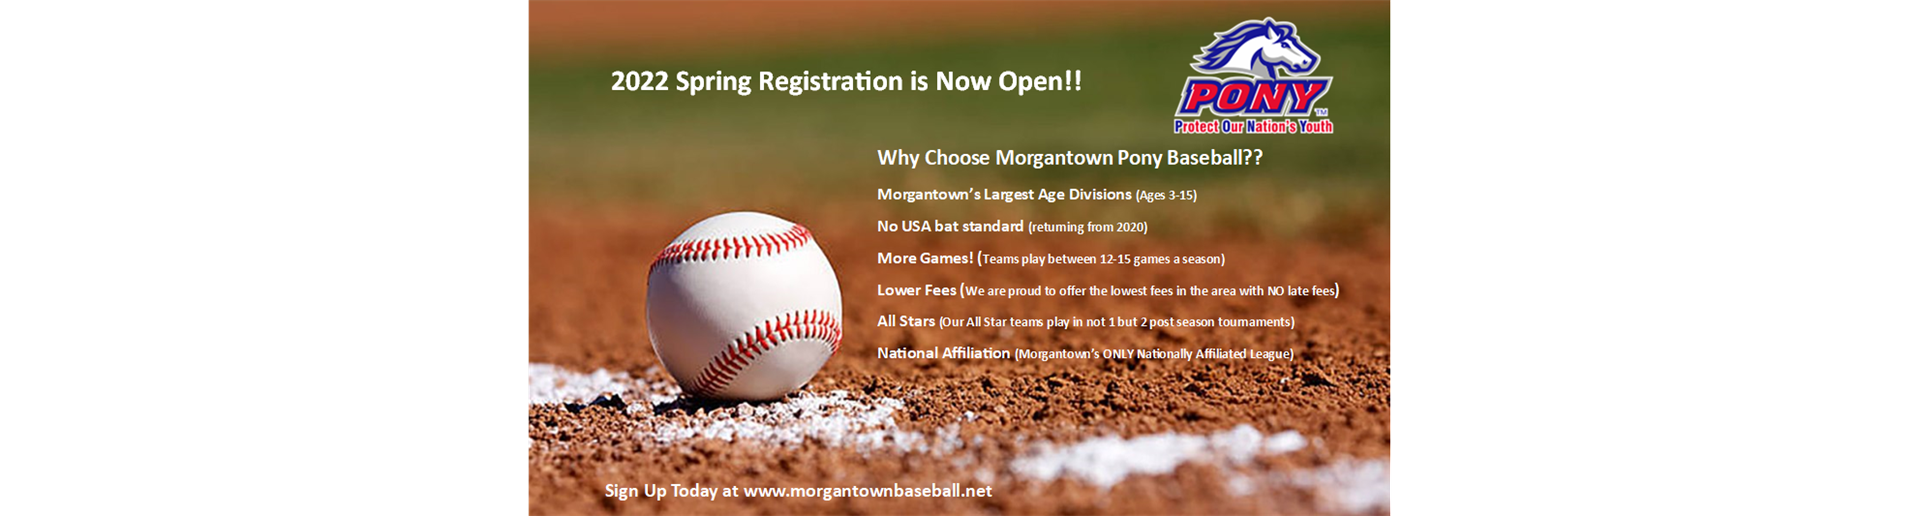 2022 Spring Registration is Now Open 